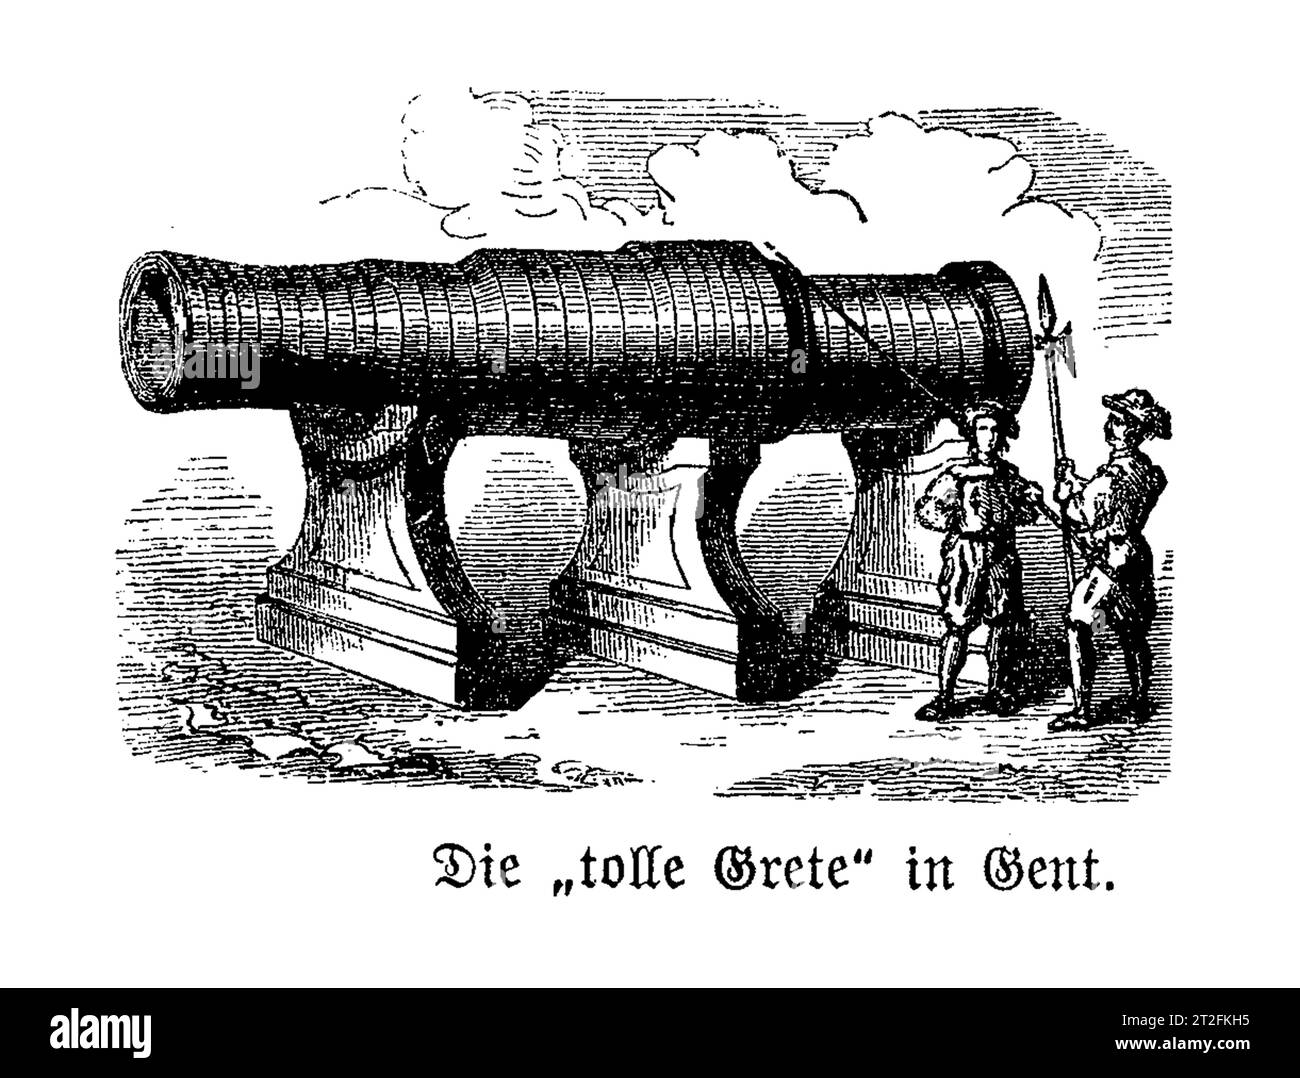 Dulle Griet ('Crazy Griet'), a medieval large-calibre gun from the first half of the 15th century from Ghent, Belgium named after a legendary Flemish warrior woman Stock Photo